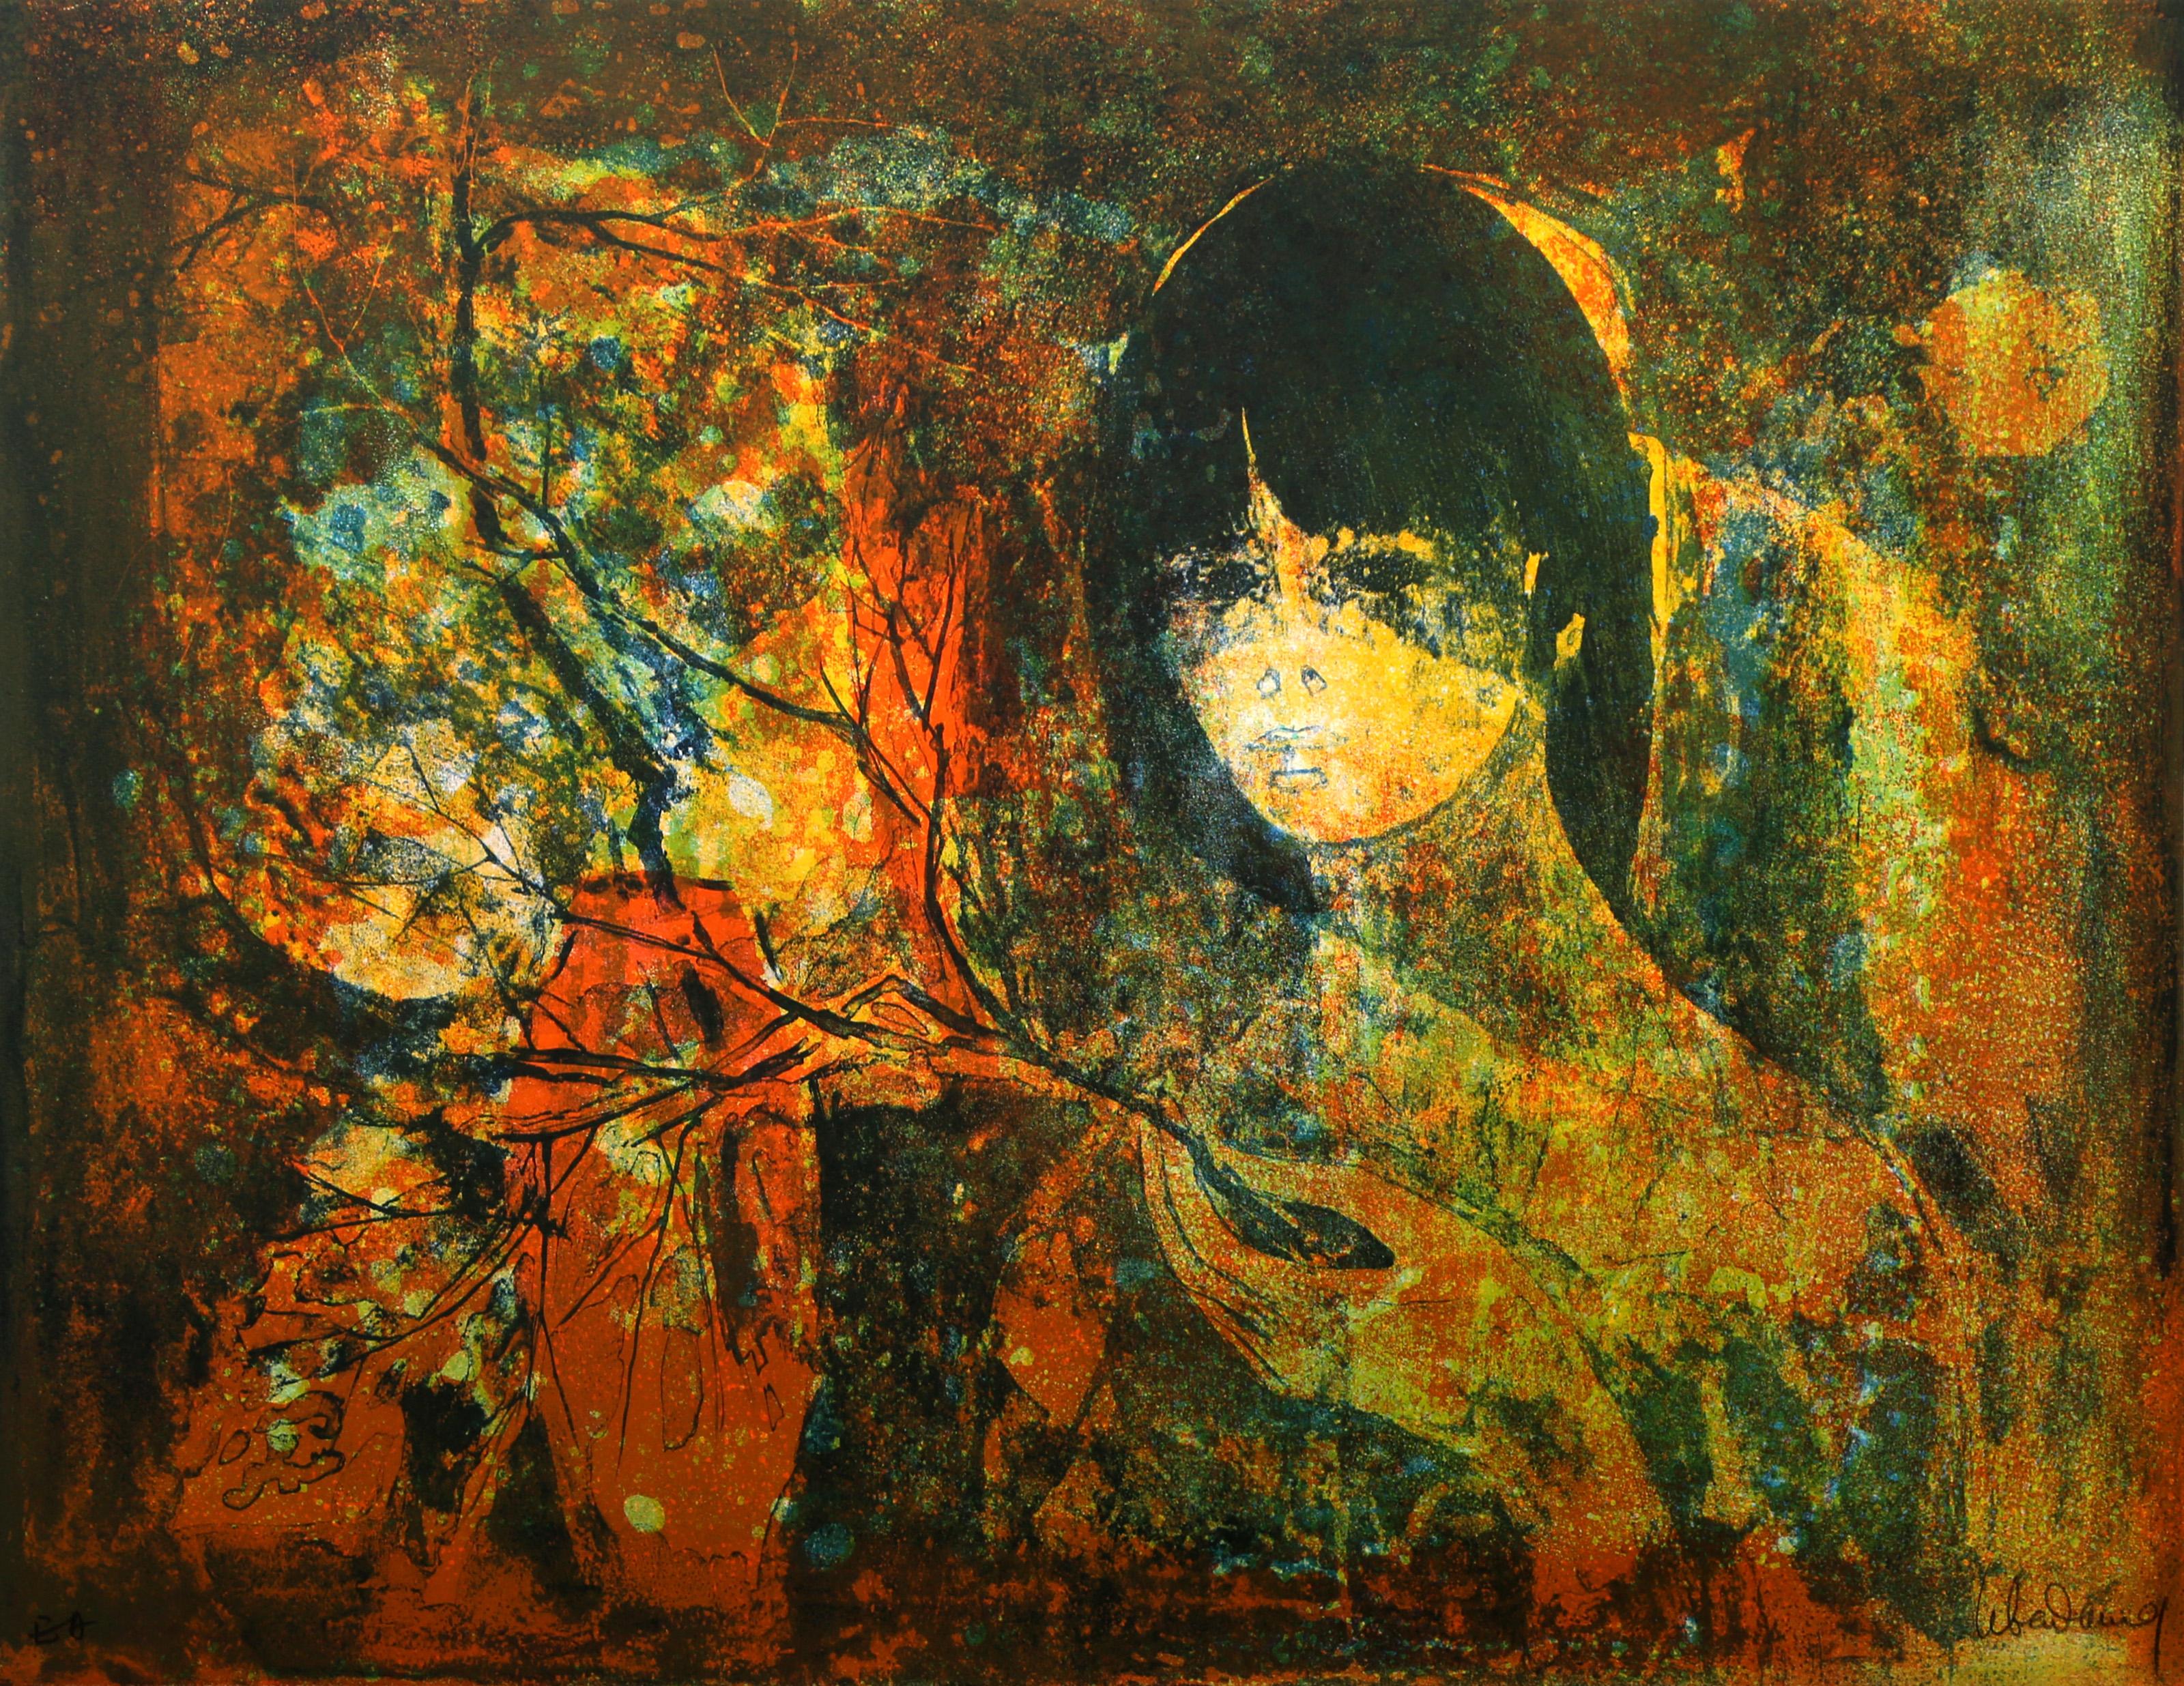 Lebadang (aka Hoi), Vietnamese (1922 - 2015) -  Woman with Branches. Medium: Lithograph, signed and numbered in pencil, Edition: E.A., Size: 19.5 x 25.5 in. (49.53 x 64.77 cm), Description: Lebadang was a Vietnam-born French artist whose work